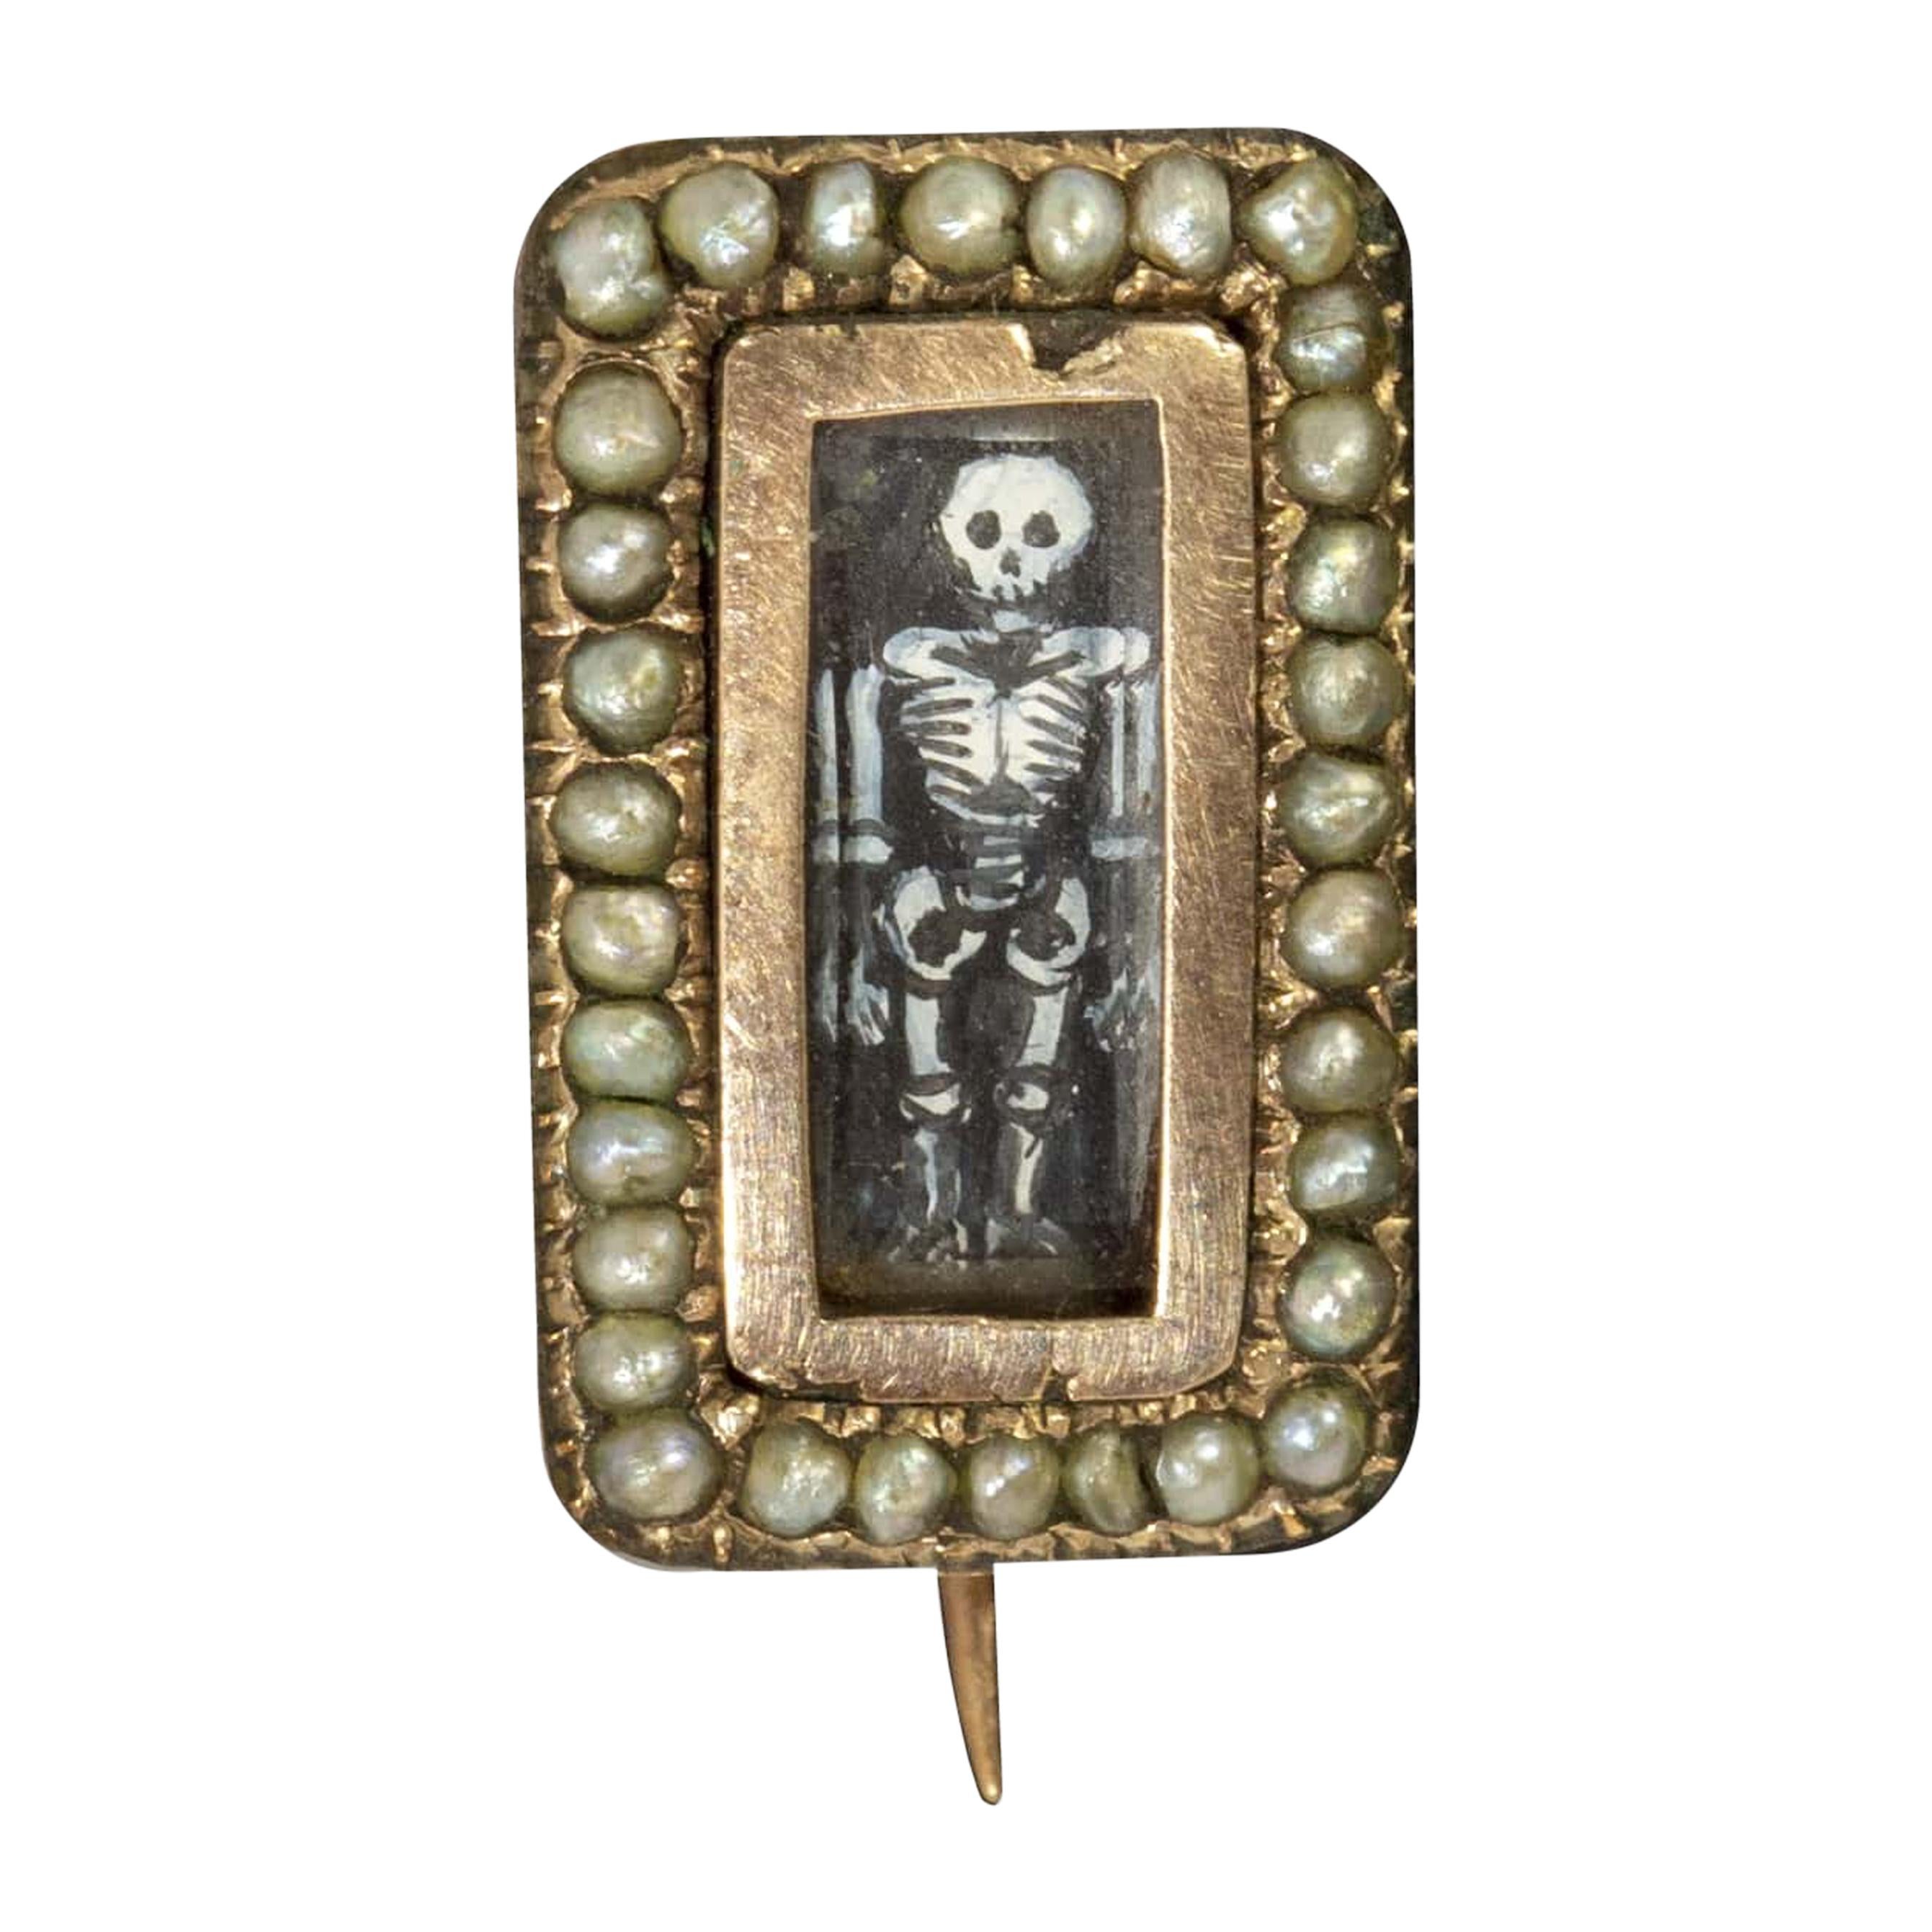 Antique rare Georgian Momento Mori Mourning Gold Pin with a Skeleton Inside . For Sale